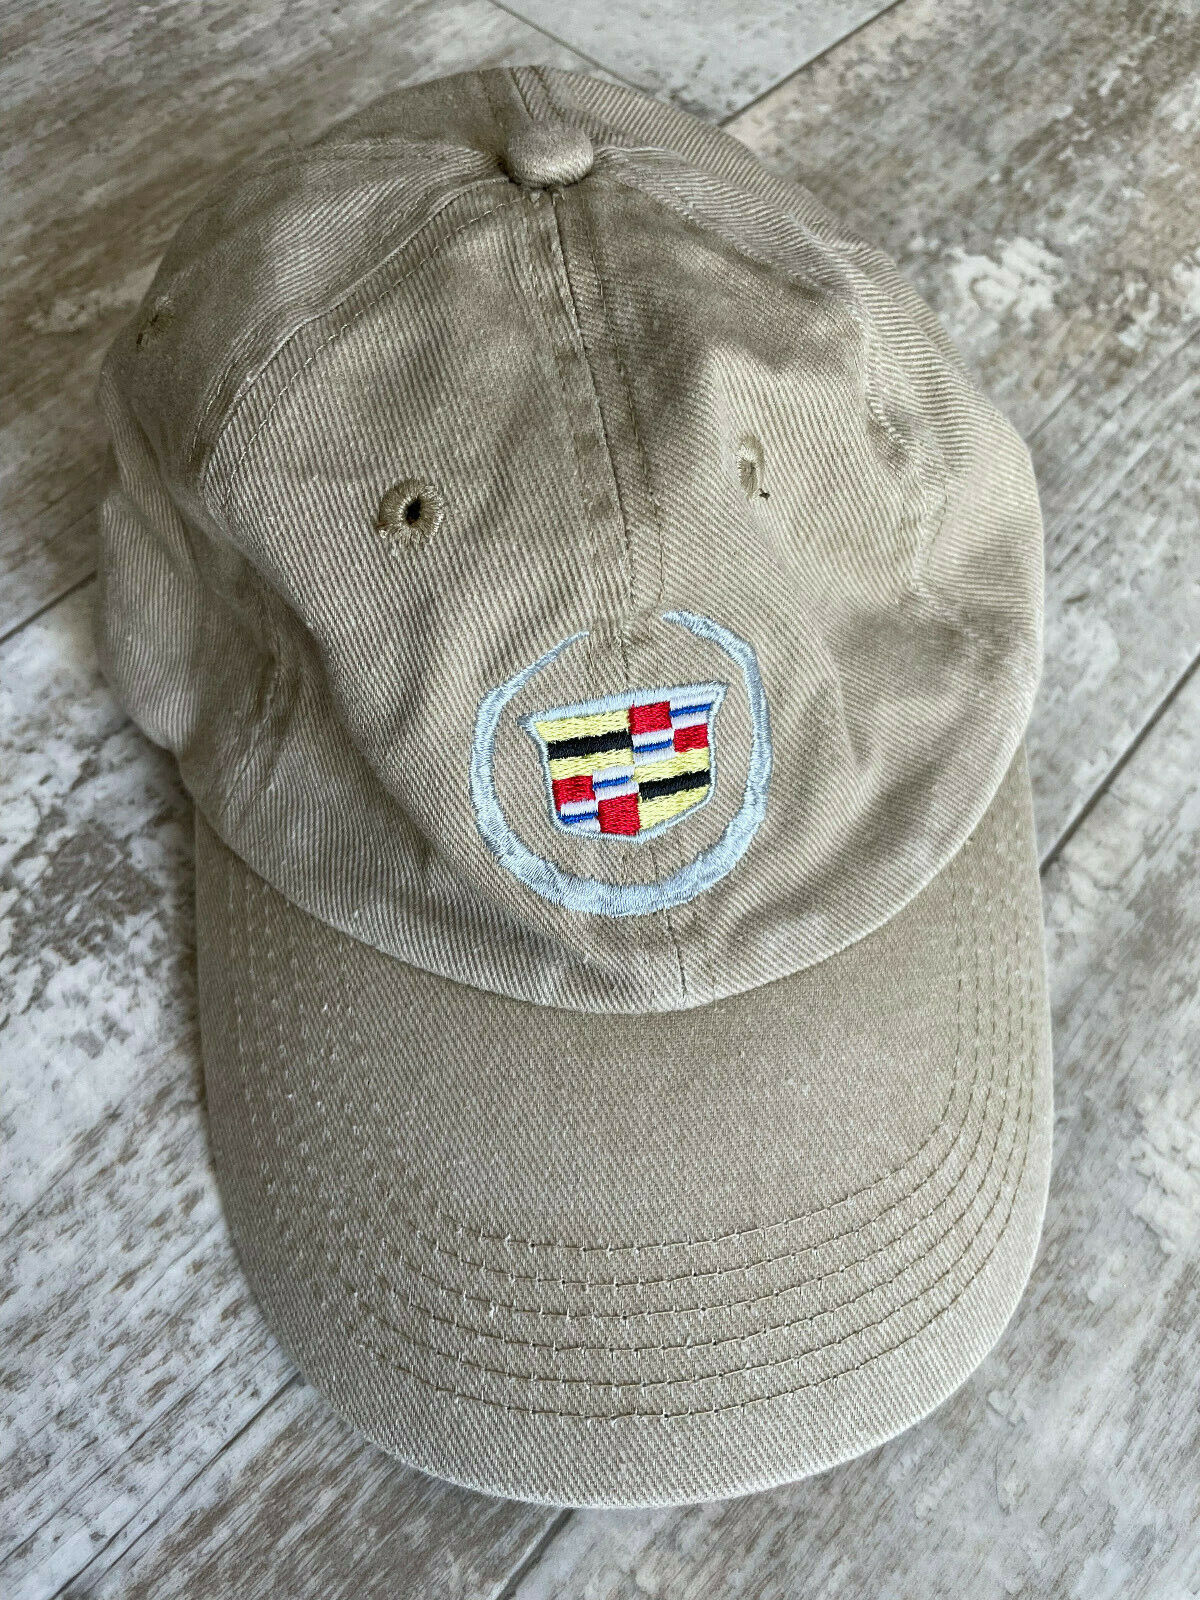 Primary image for Cadillac Adjustable Strap Back Hat (Cadillac of Memphis on Back)